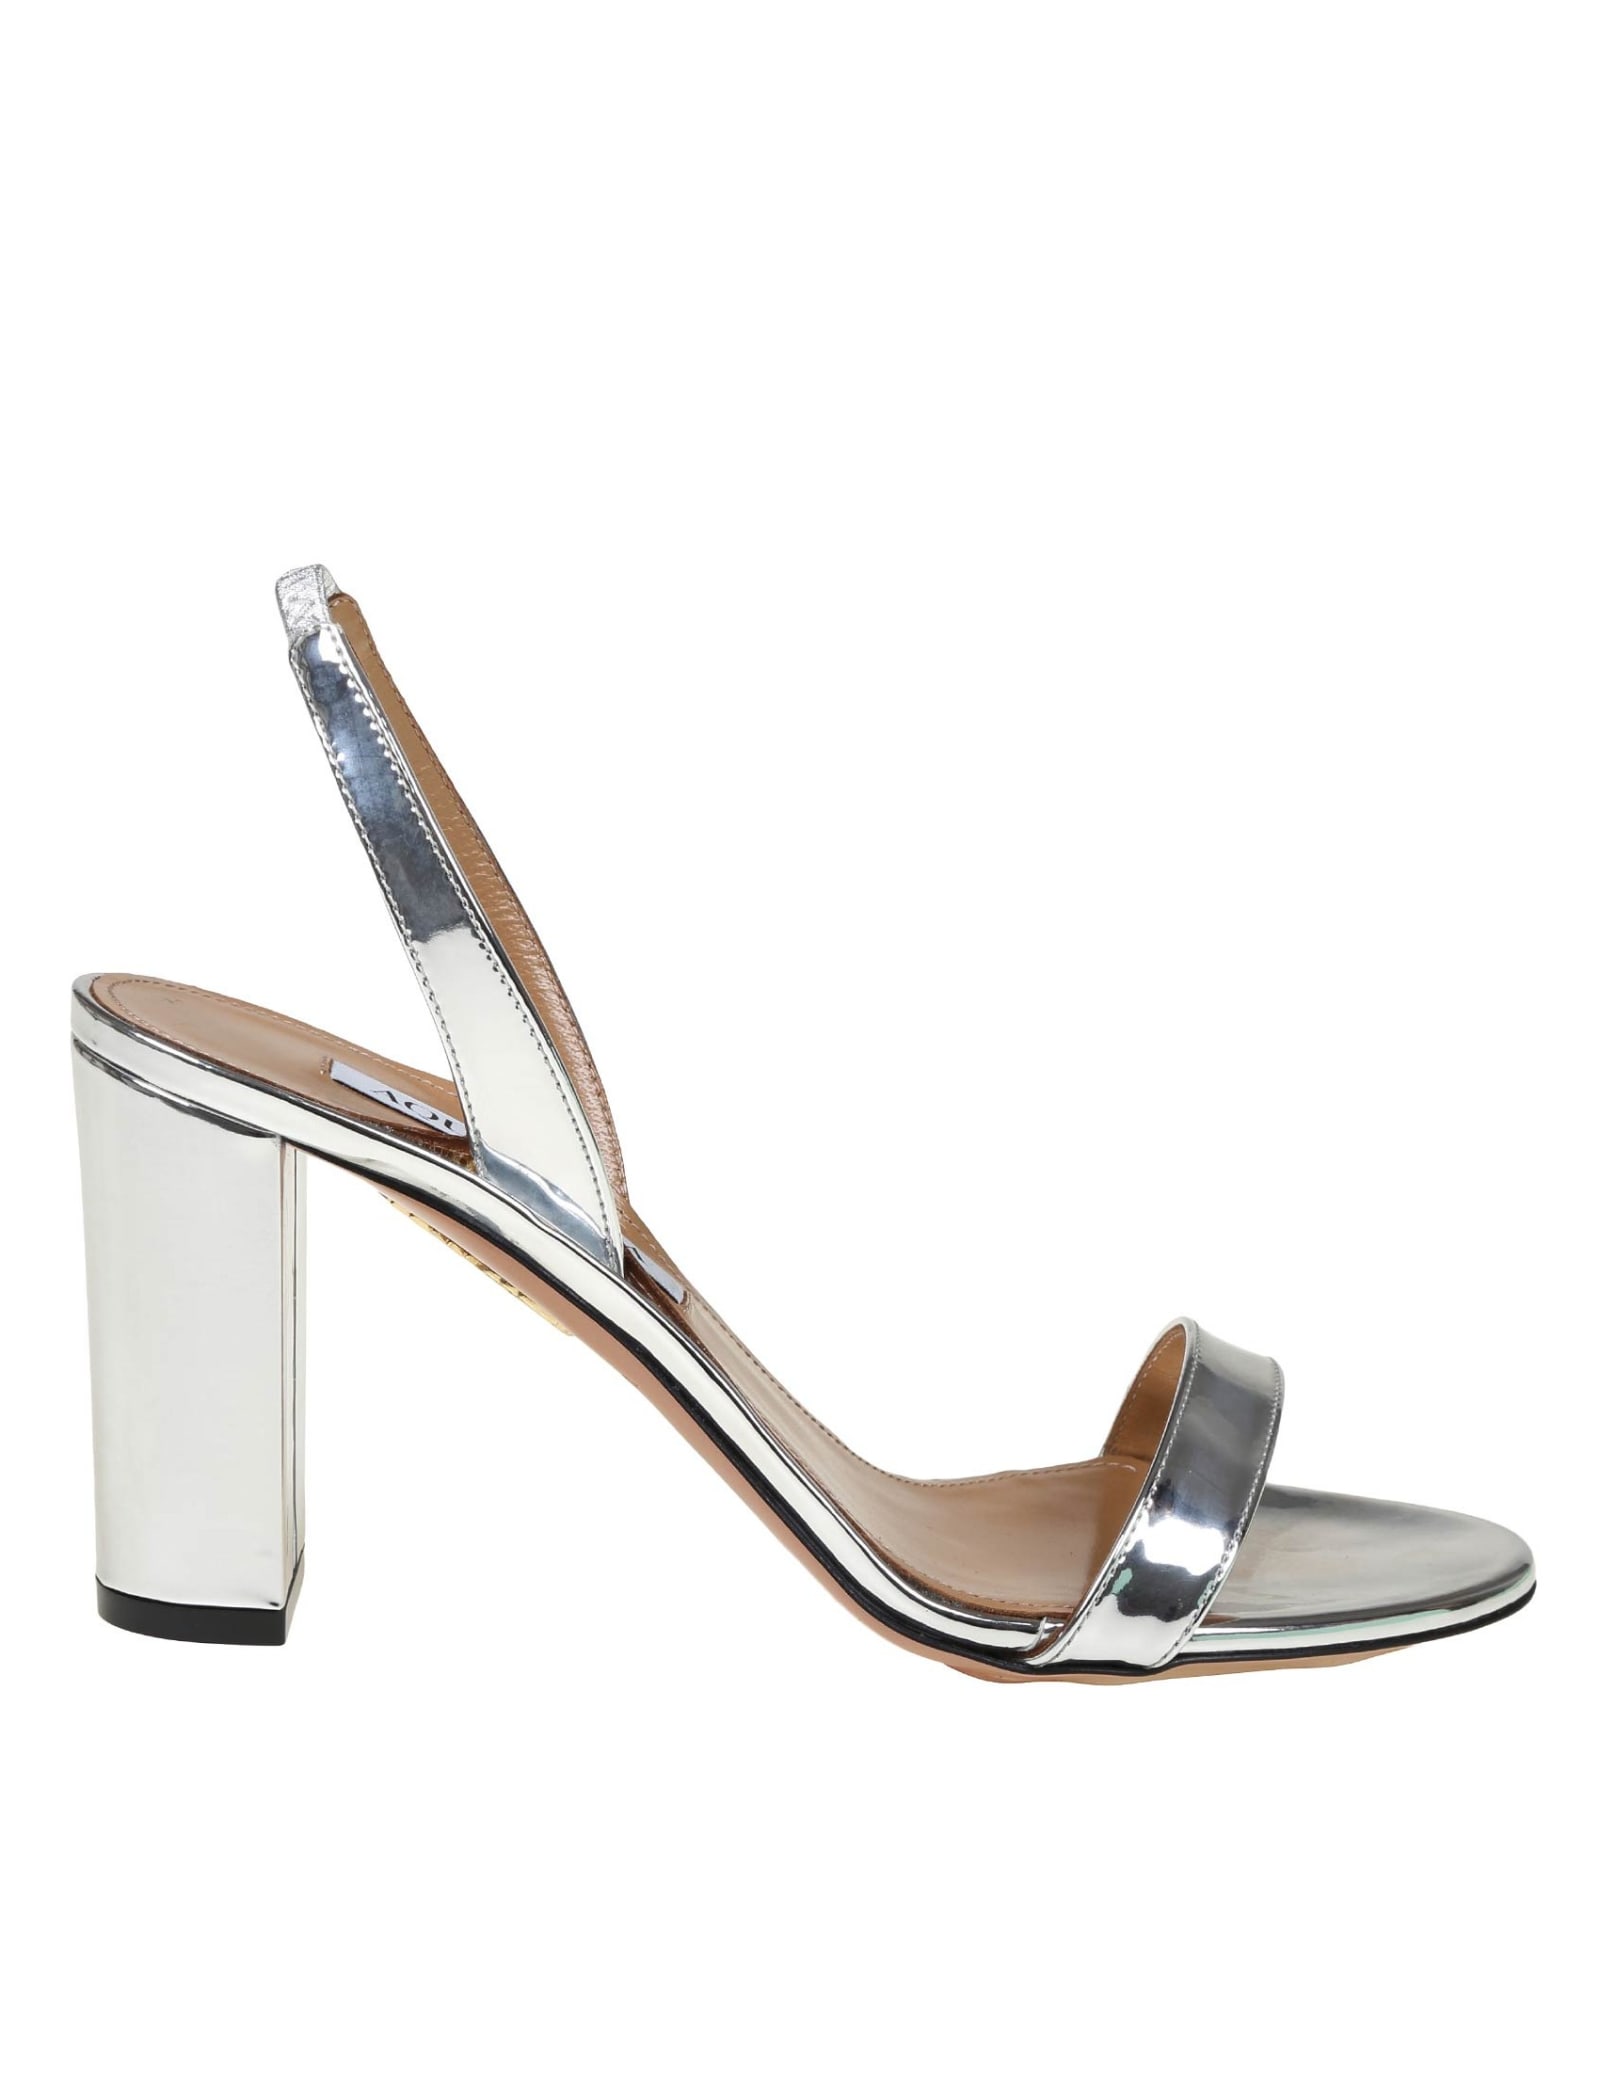 So Nude Sandal In Mirror Effect Leather